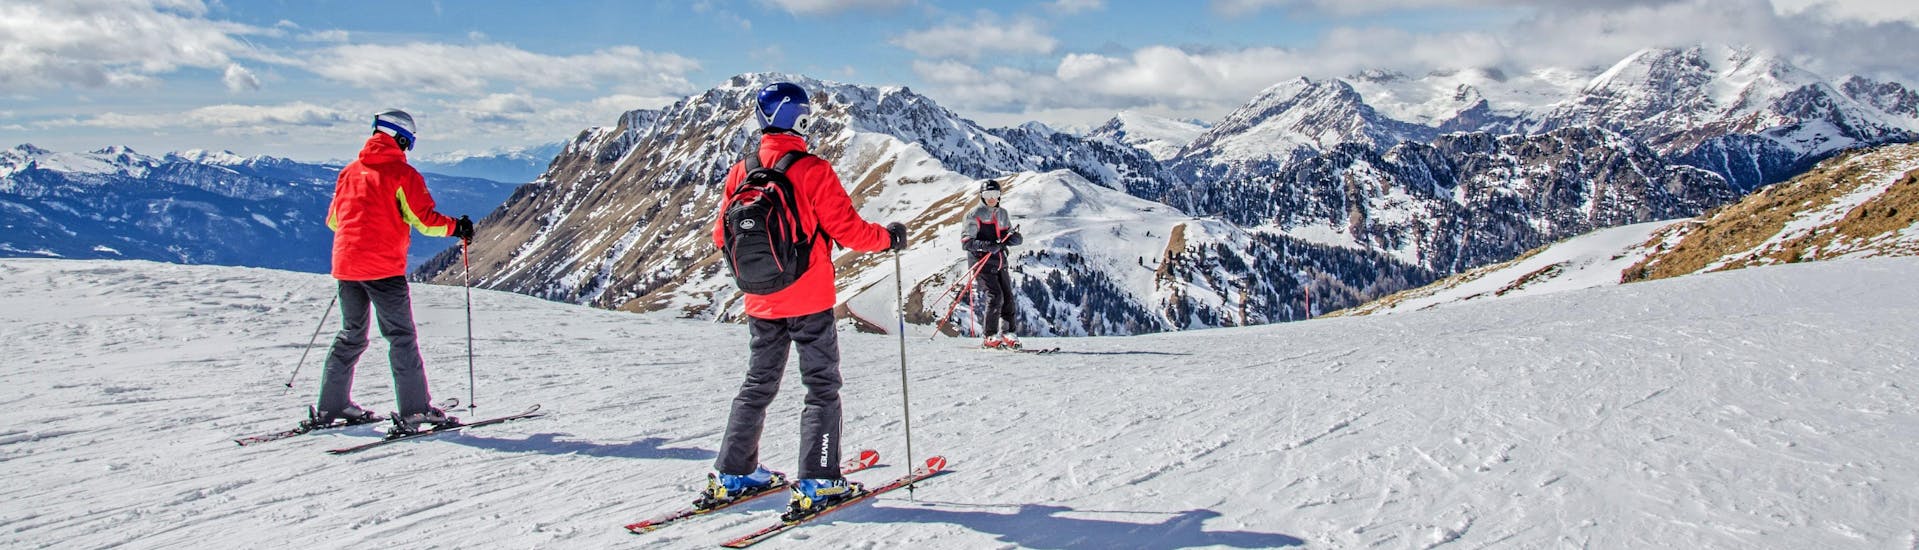 Skiers are enjoying the stunning panorama of Val di Fiemme in the ski area Dolomiti Superski  in Trentino, where local ski schools offer their ski lessons.